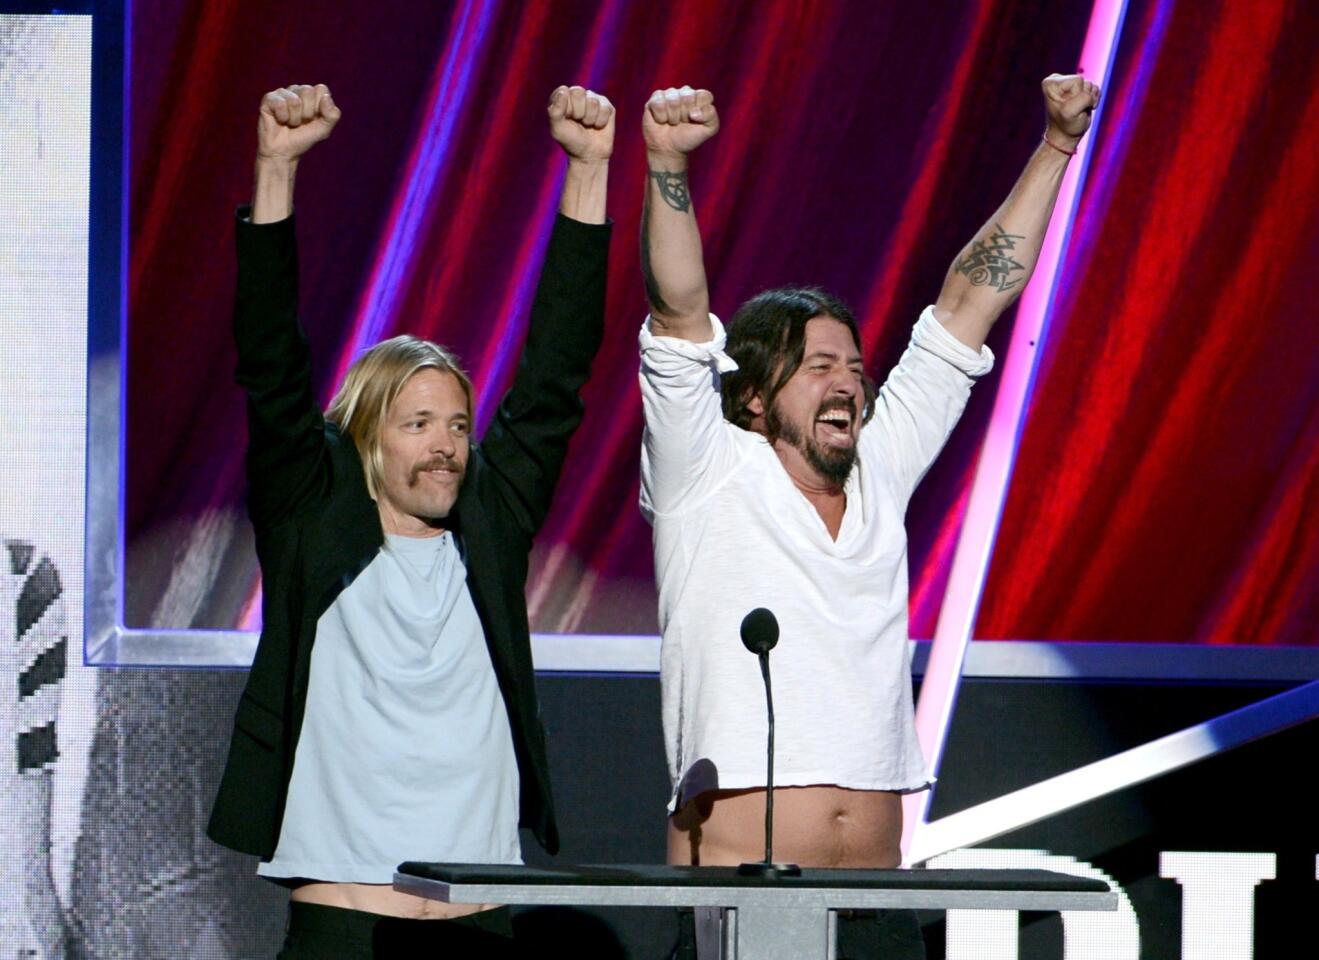 Presenters Taylor Hawkins and Dave Grohl of Foo Fighters, displaying their musical enthusiasm, speak onstage at the 28th Rock and Roll Hall of Fame induction ceremony at Nokia Theatre L.A. Live.